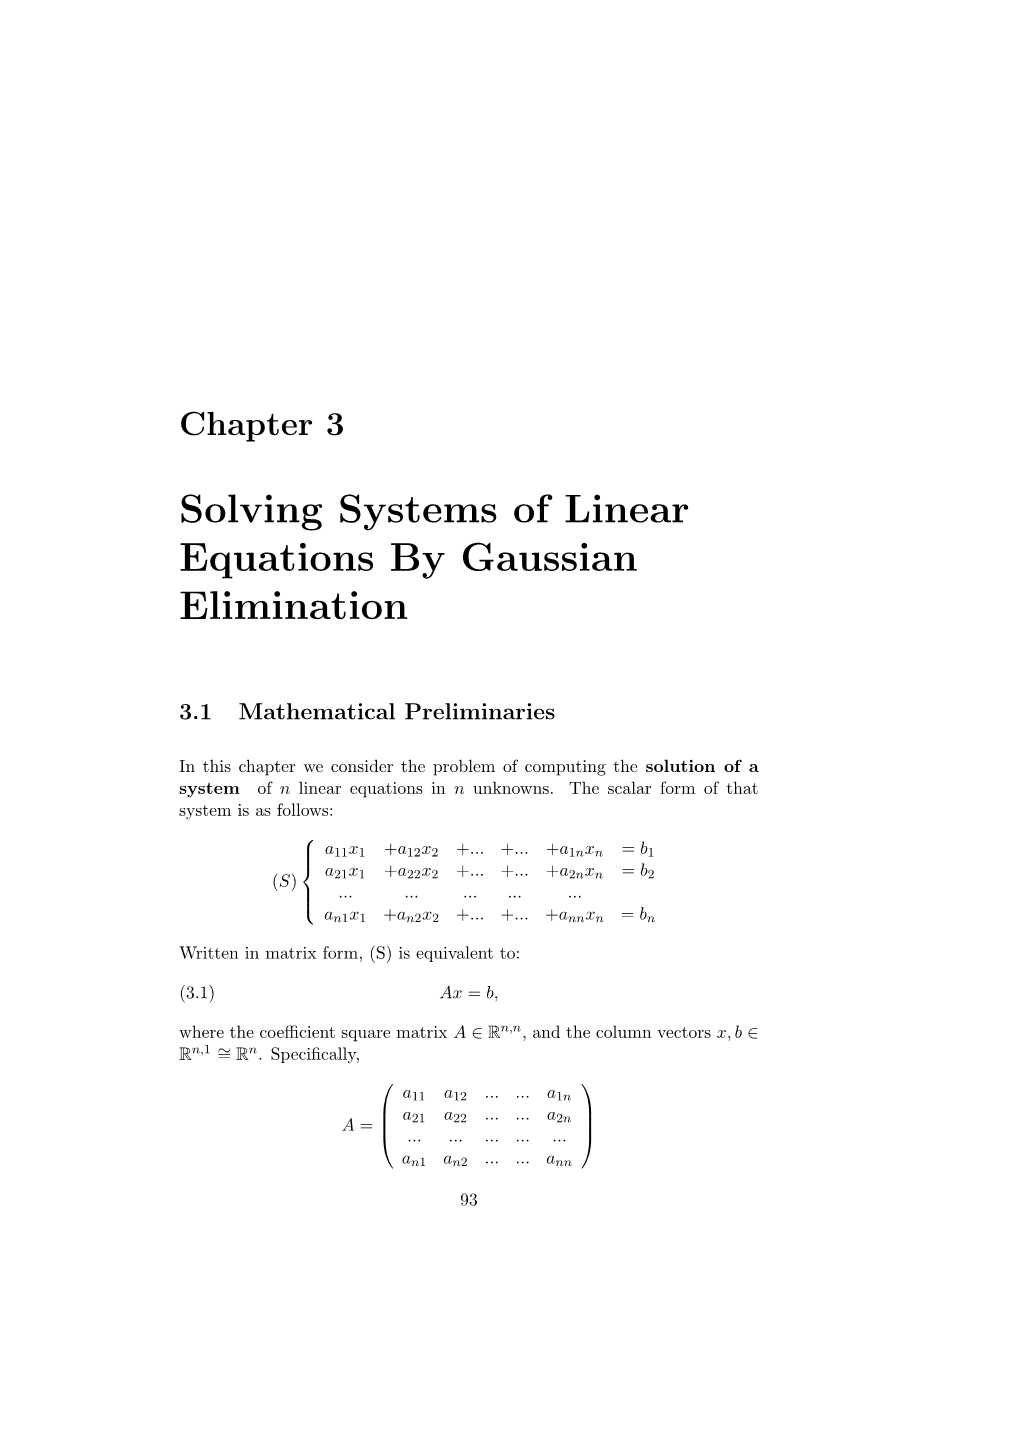 Solving Systems of Linear Equations by Gaussian Elimination